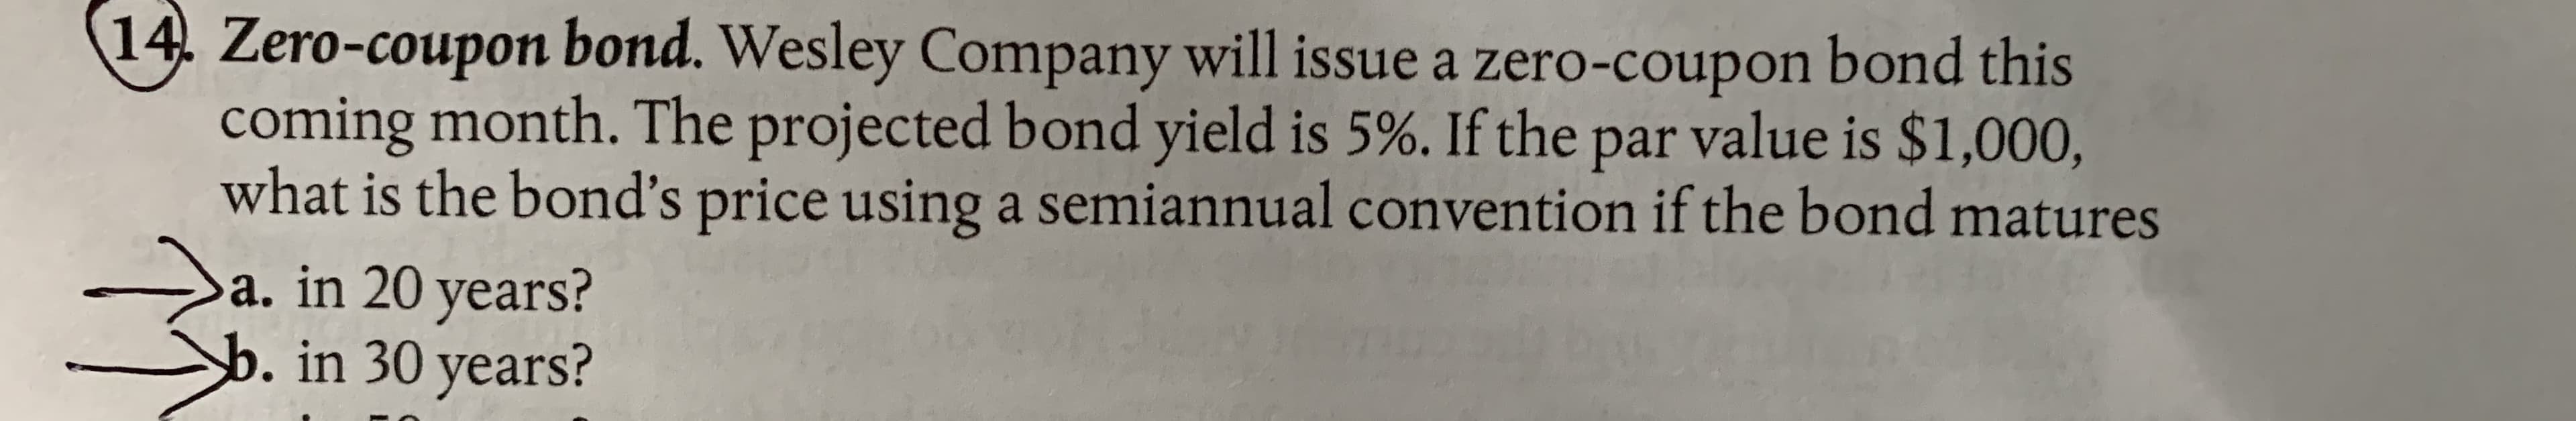 Zero-coupon bond. Wesley Company will issue a zero-coupon bond this
coming month. The projected bond yield is 5%. If the par value is $1,000,
what is the bond's price using a semiannual convention if the bond matures
Da, in 20 years?
b. in 30 years?
